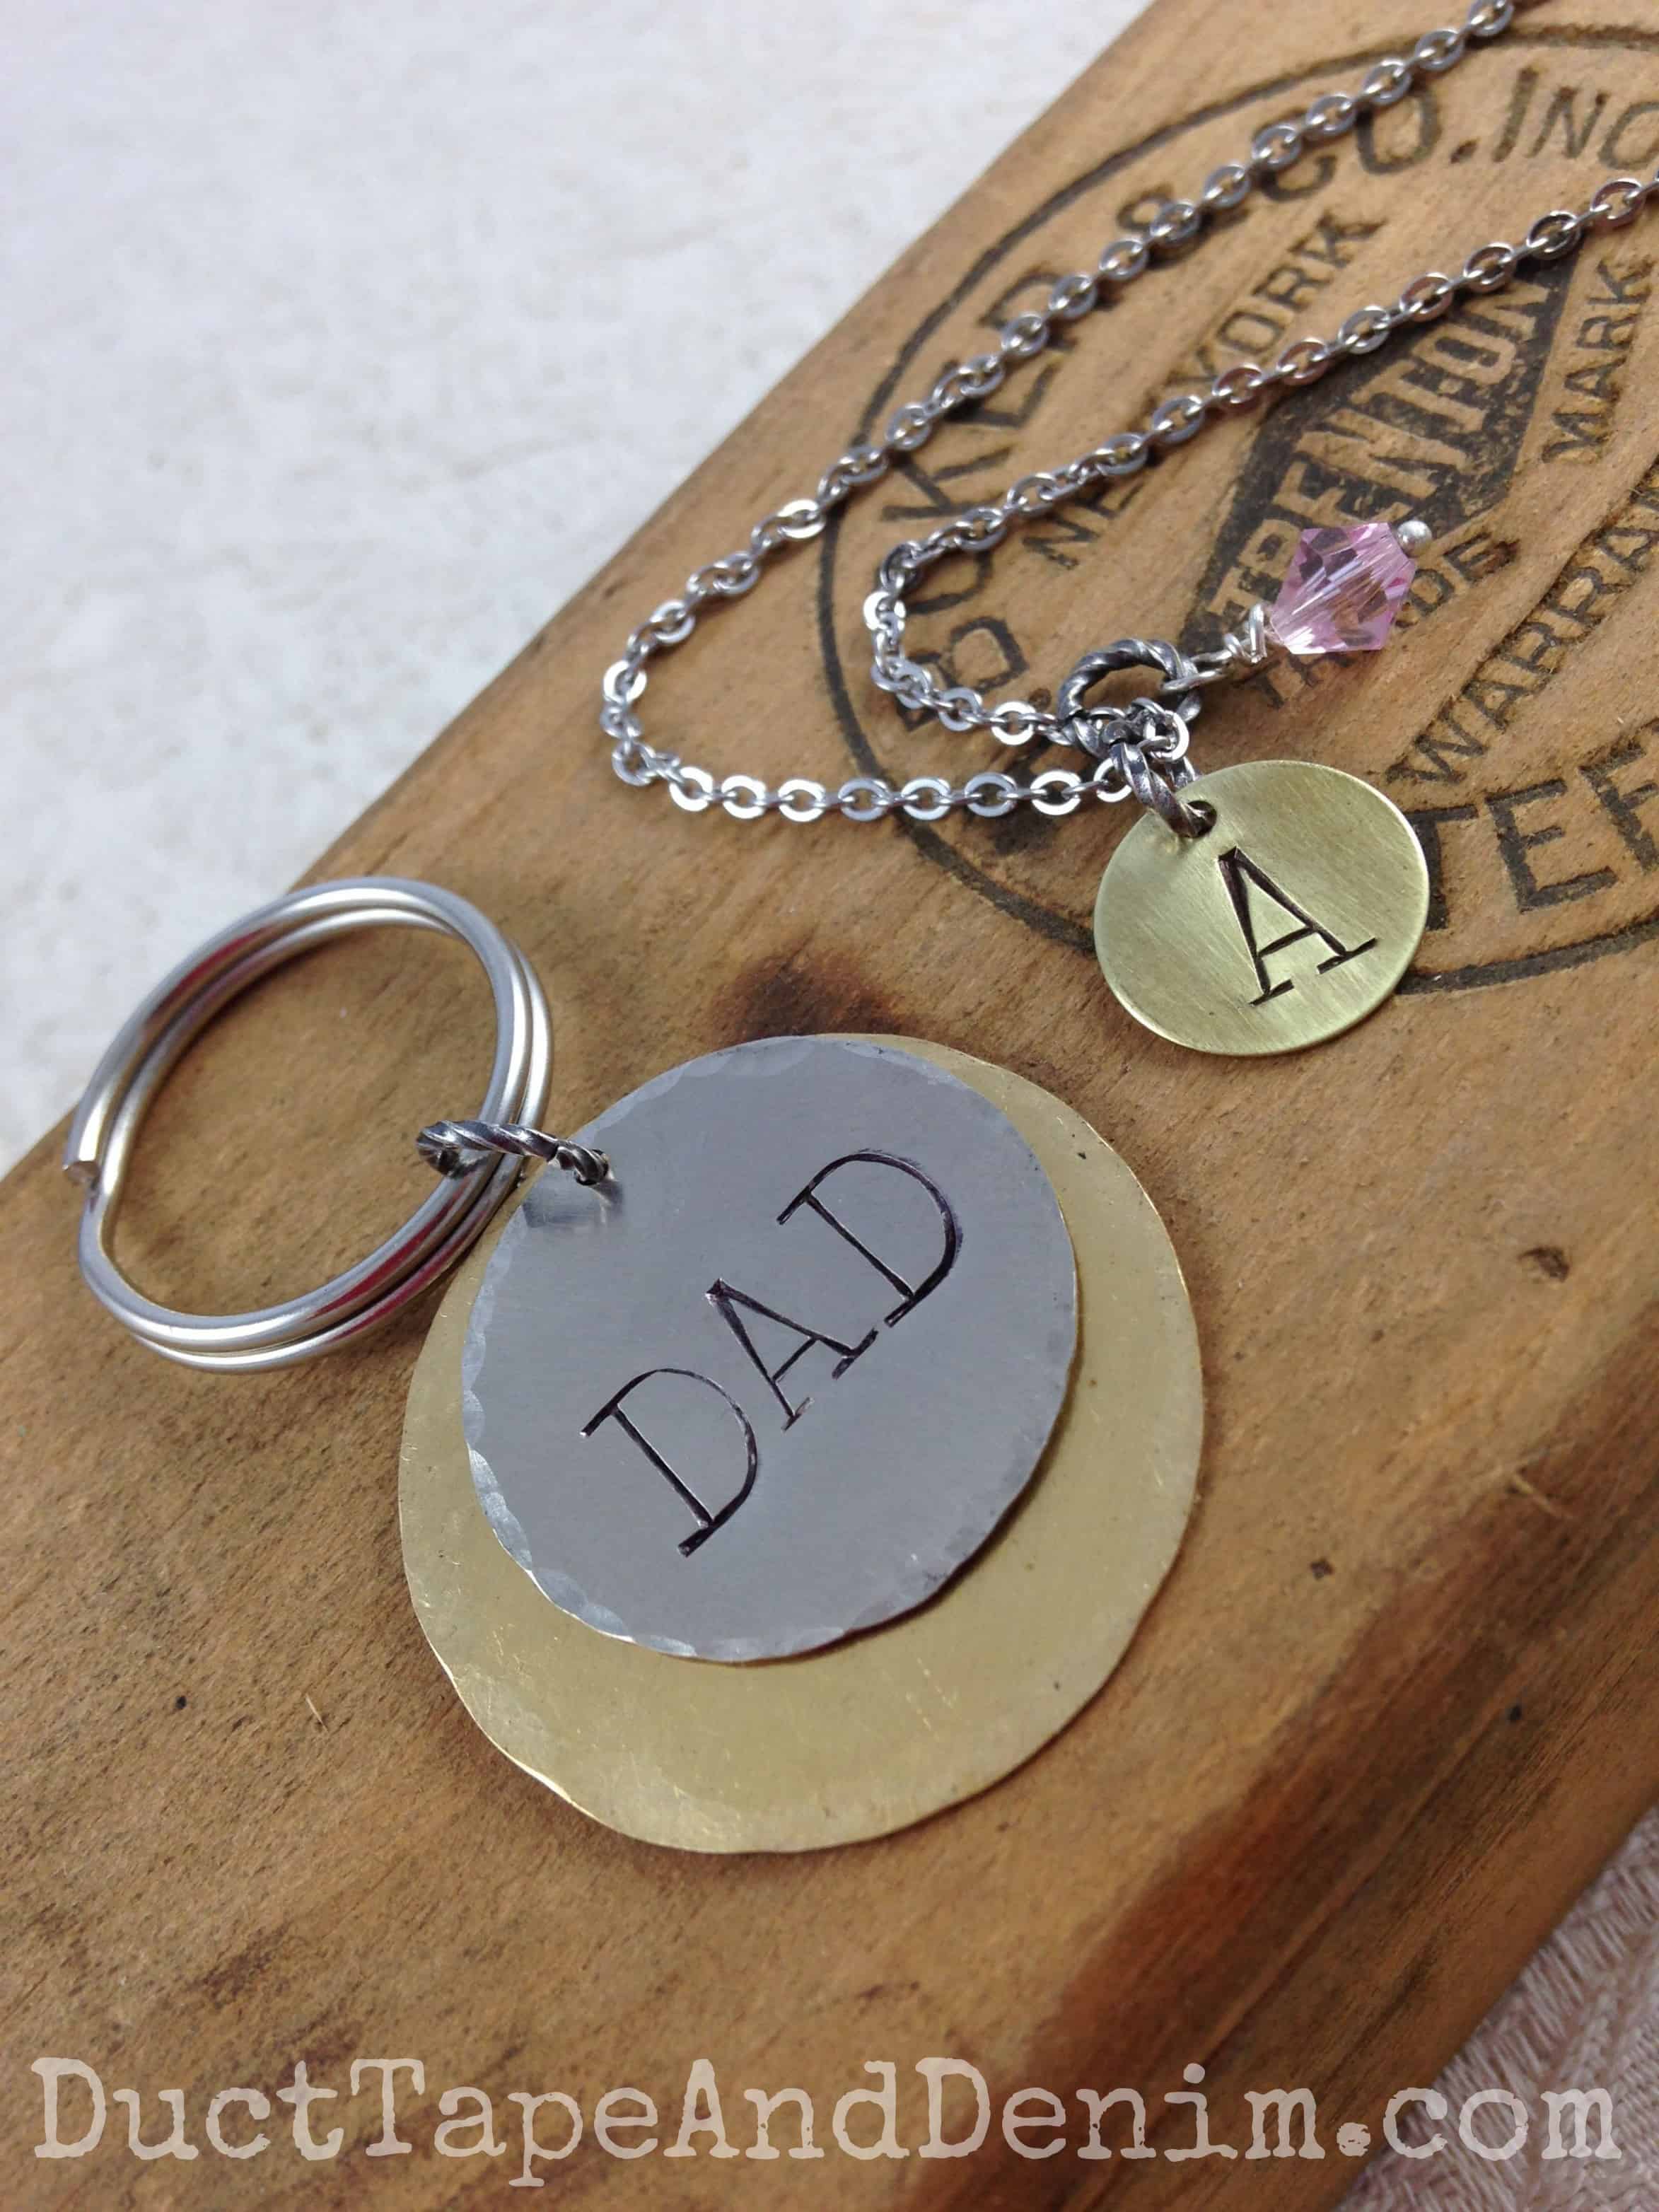 Hand-stamped jewelry I made with the new metal stamps I bought at an antique show. Dad keyring. Custom letter A necklace | DuctTapeAndDenim.com